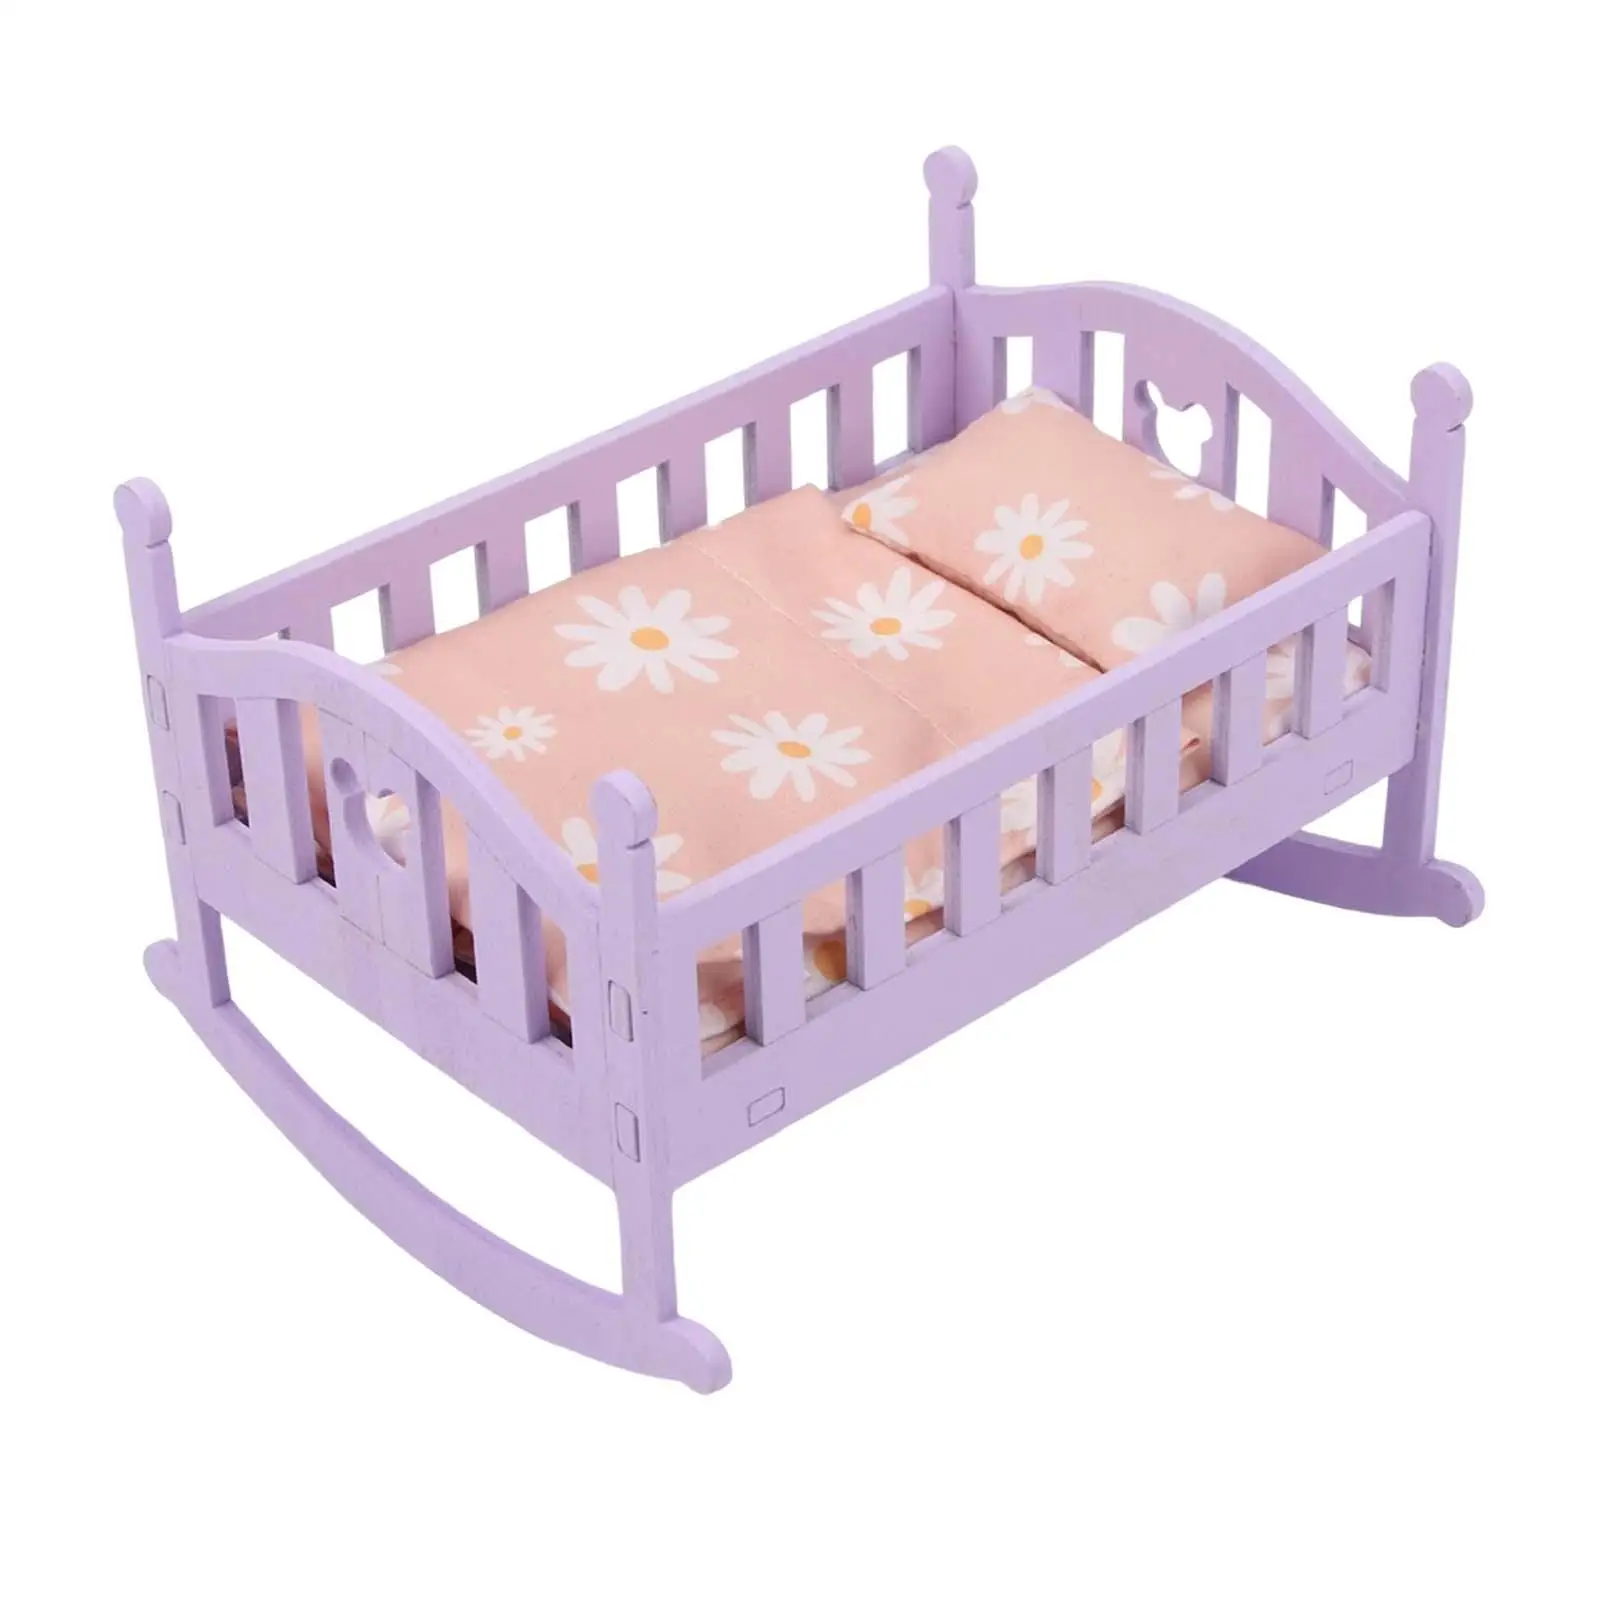 Fashion Doll Bed with Quilt, Pillow and Mattress Bedroom for 1:12 Doll Decor